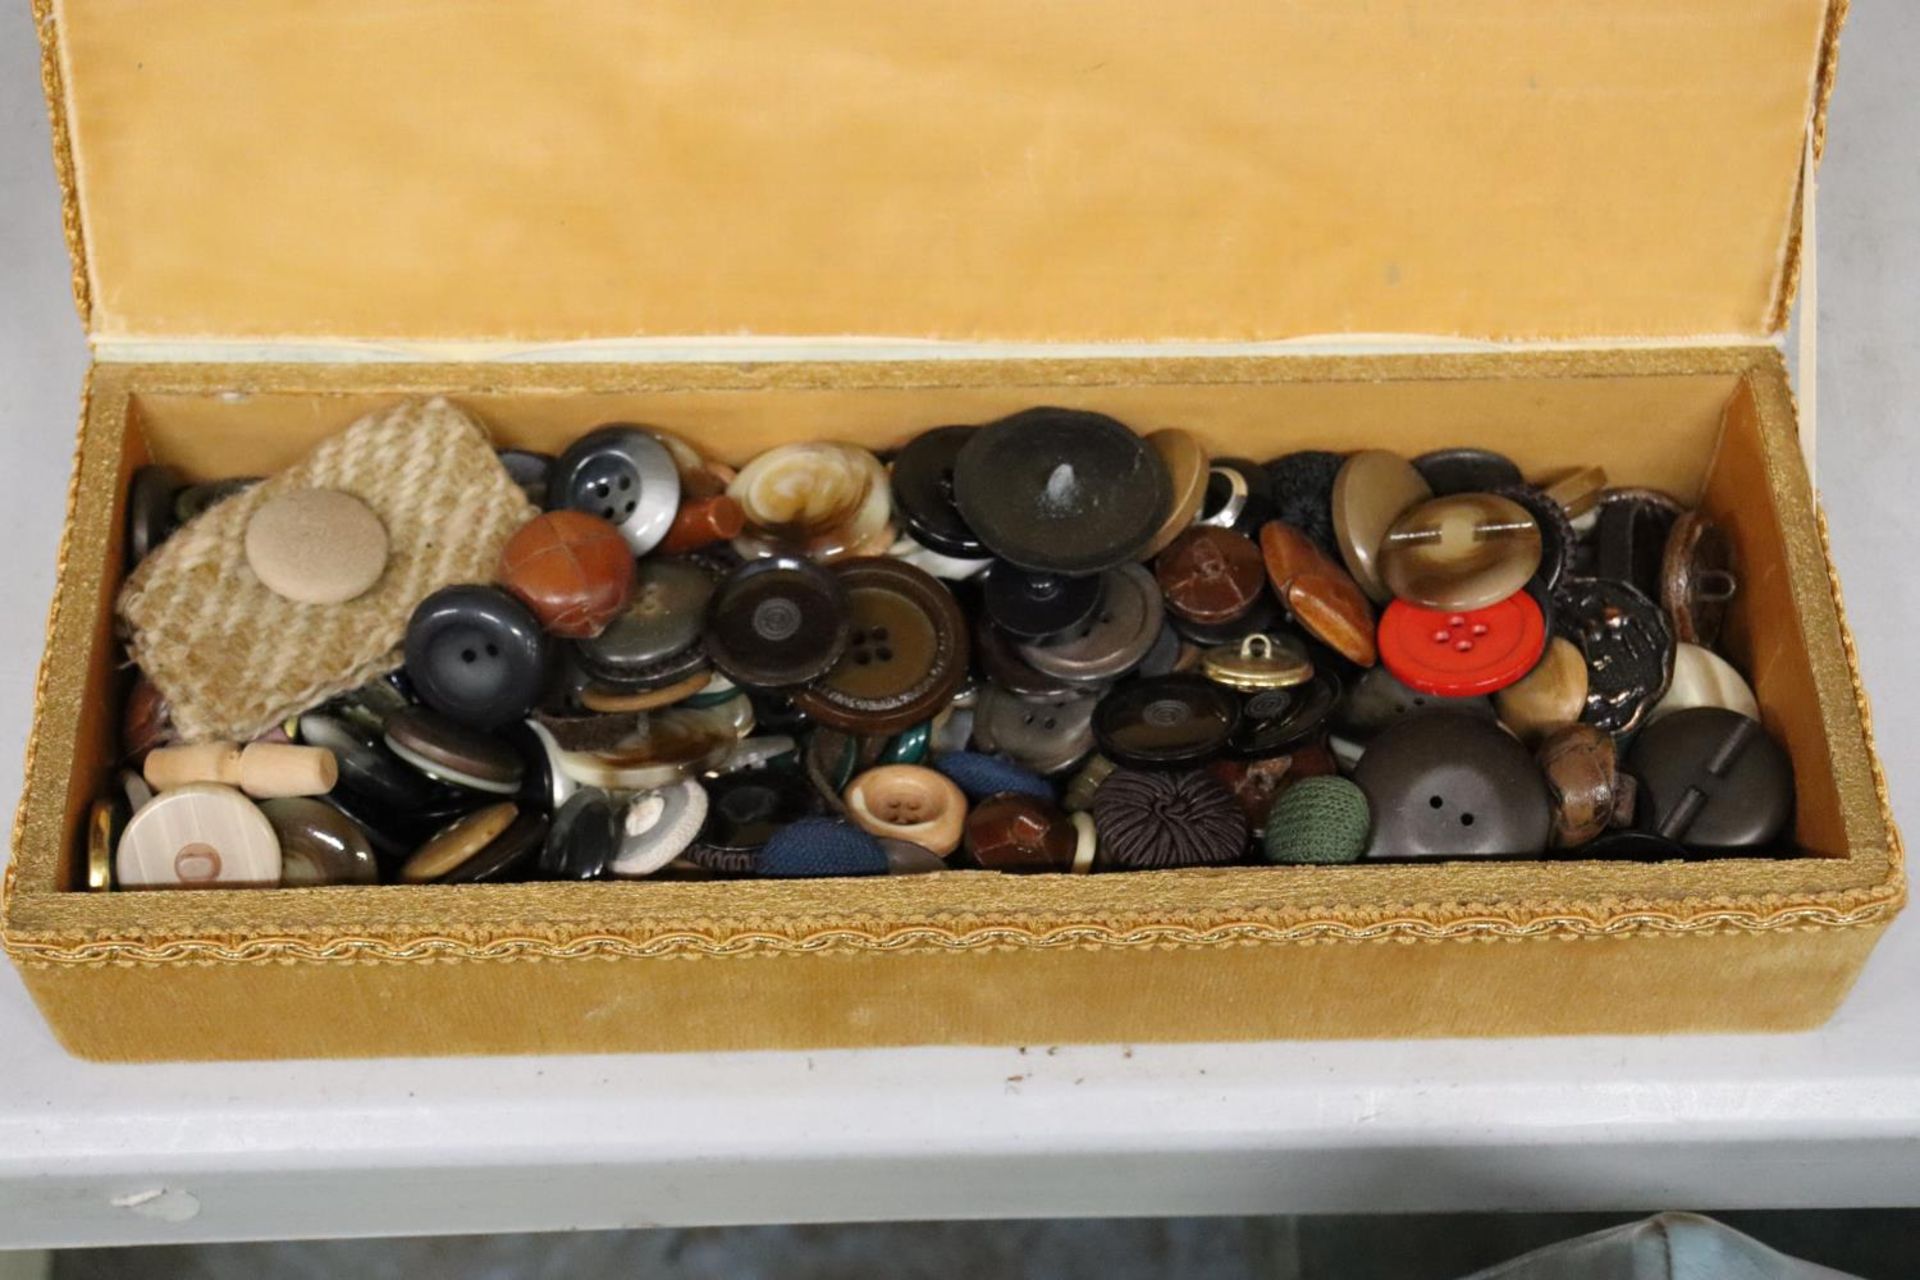 A LARGE QUANTITY OF VINTAGE BUTTONS IN BOXES PLUS HABERDASHERY ITEMS - Image 2 of 5